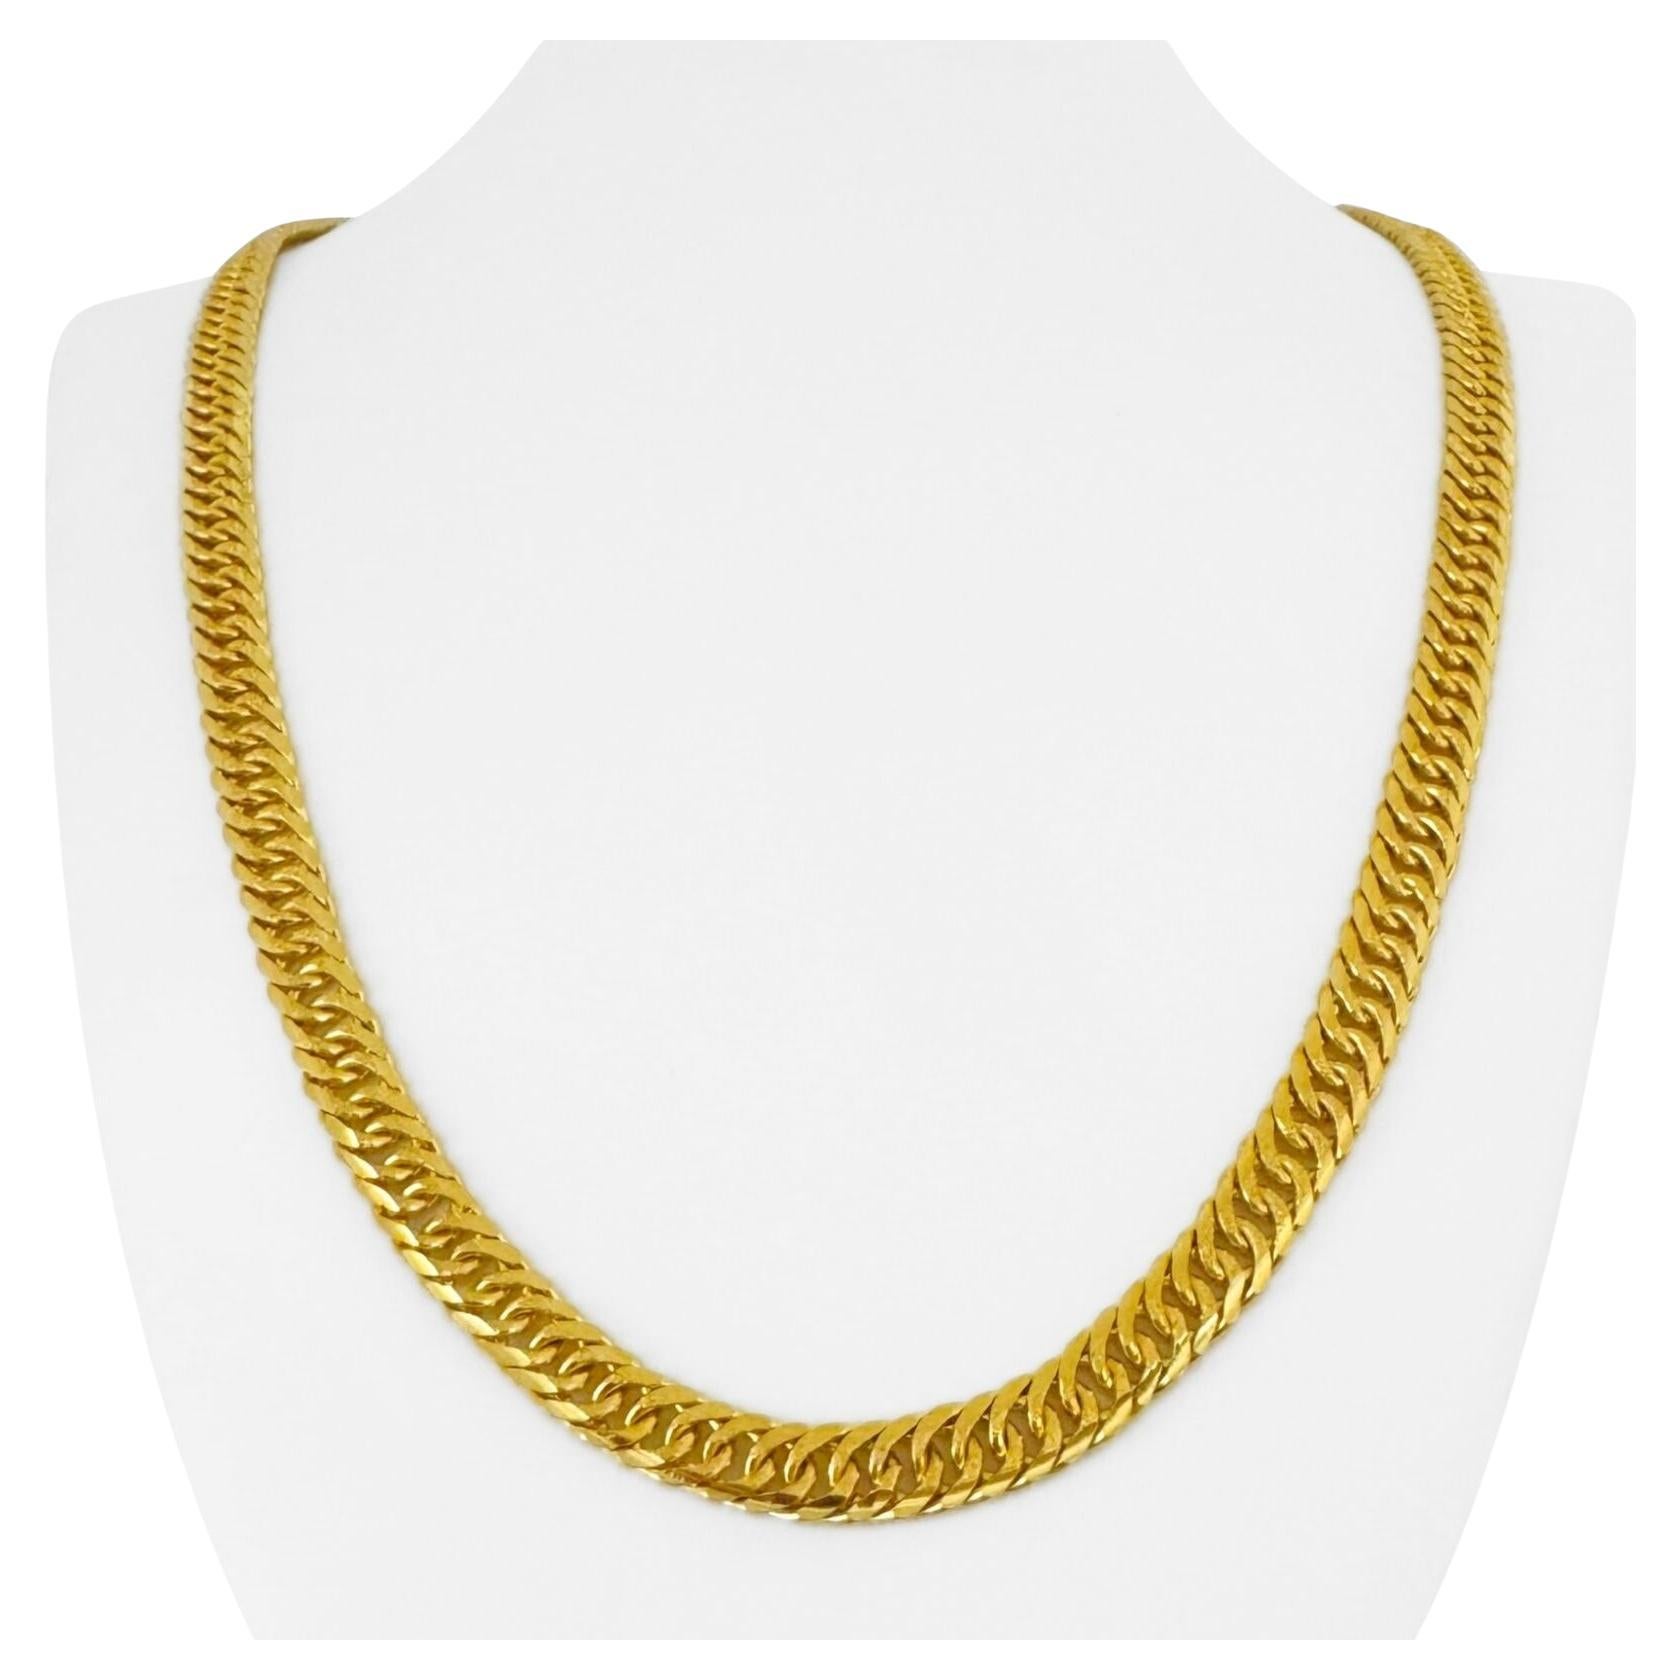 24 Karat Pure Yellow Gold Solid Heavy Fancy Curb Link Chain Necklace 